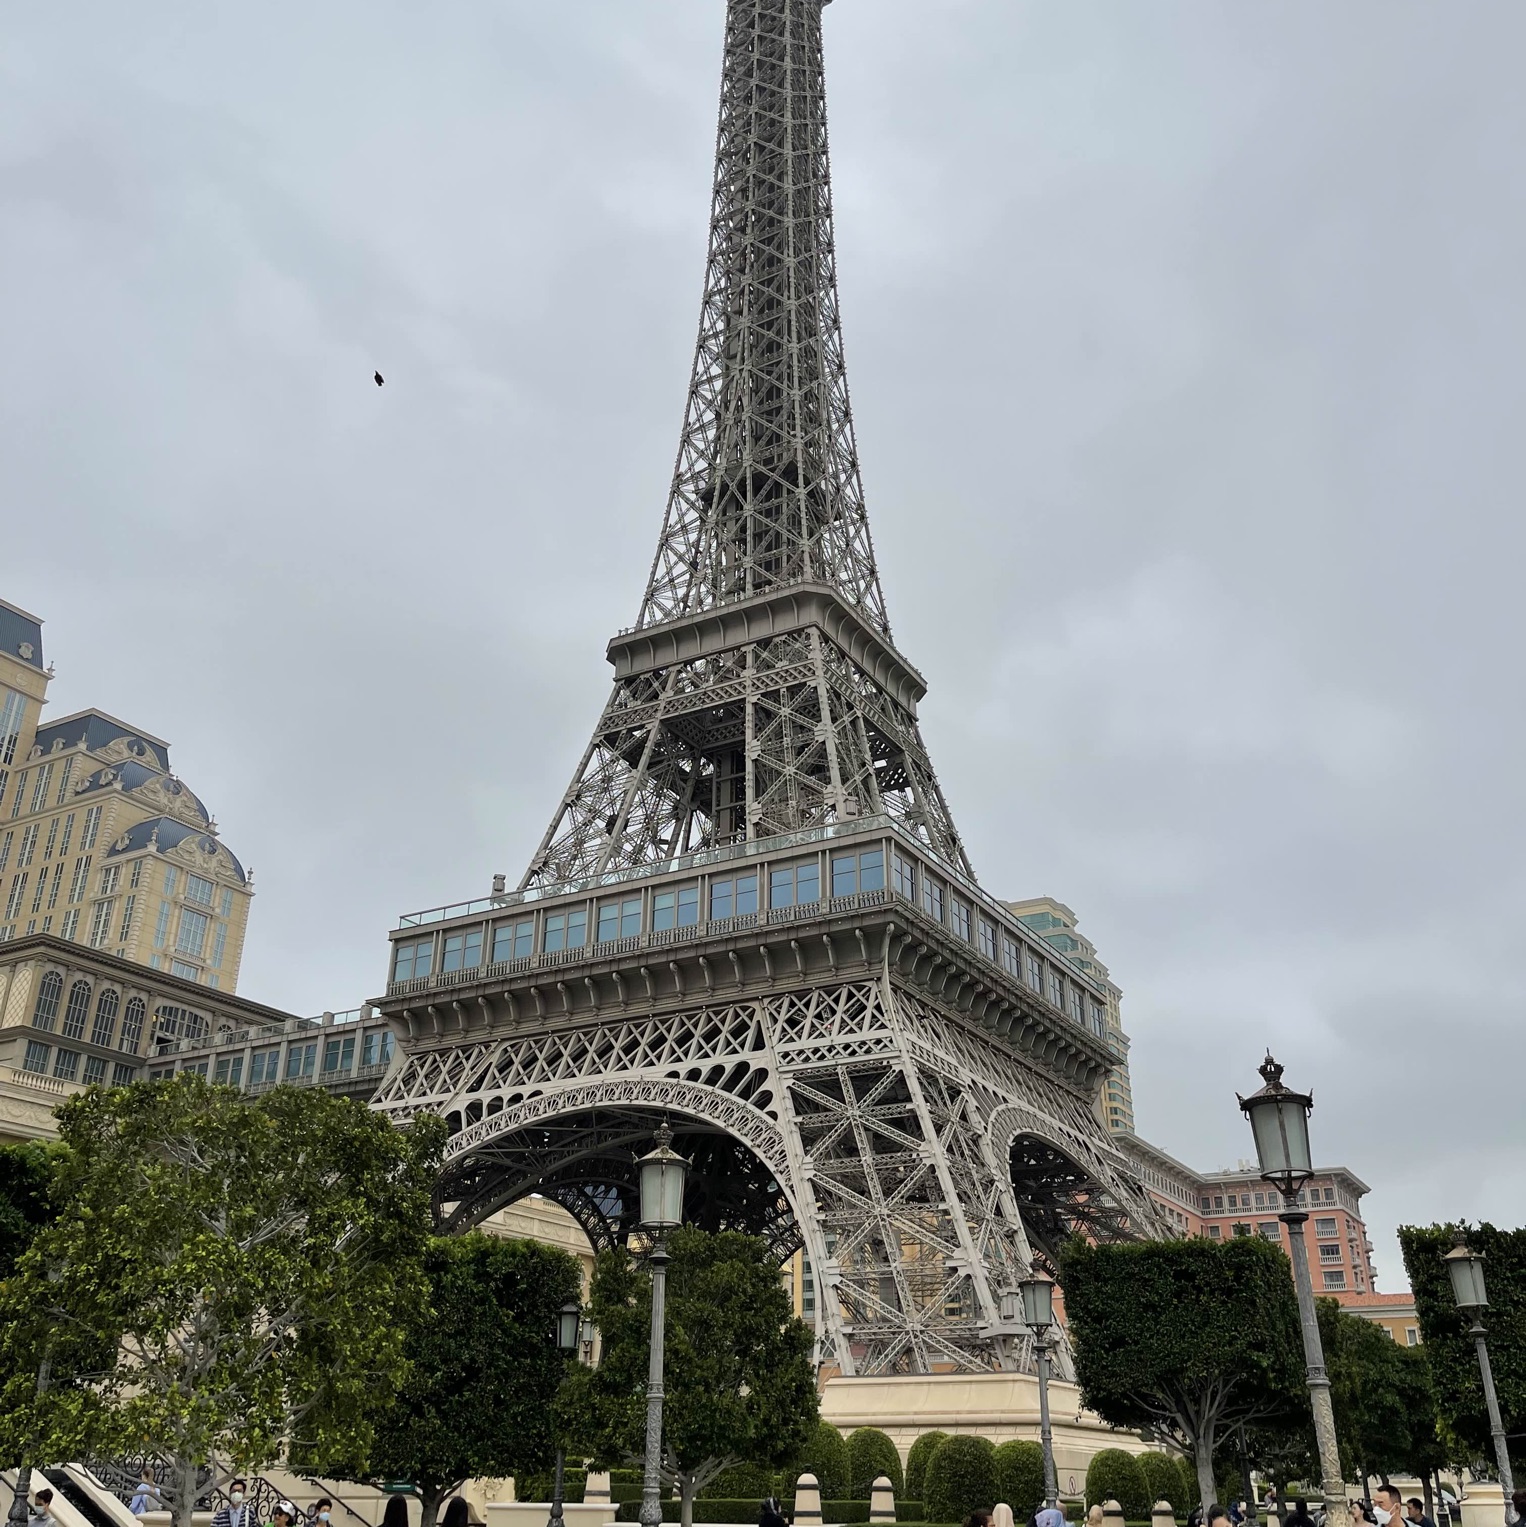 The Parisian Macao - French Flair And A Half-Sized Eiffel Tower